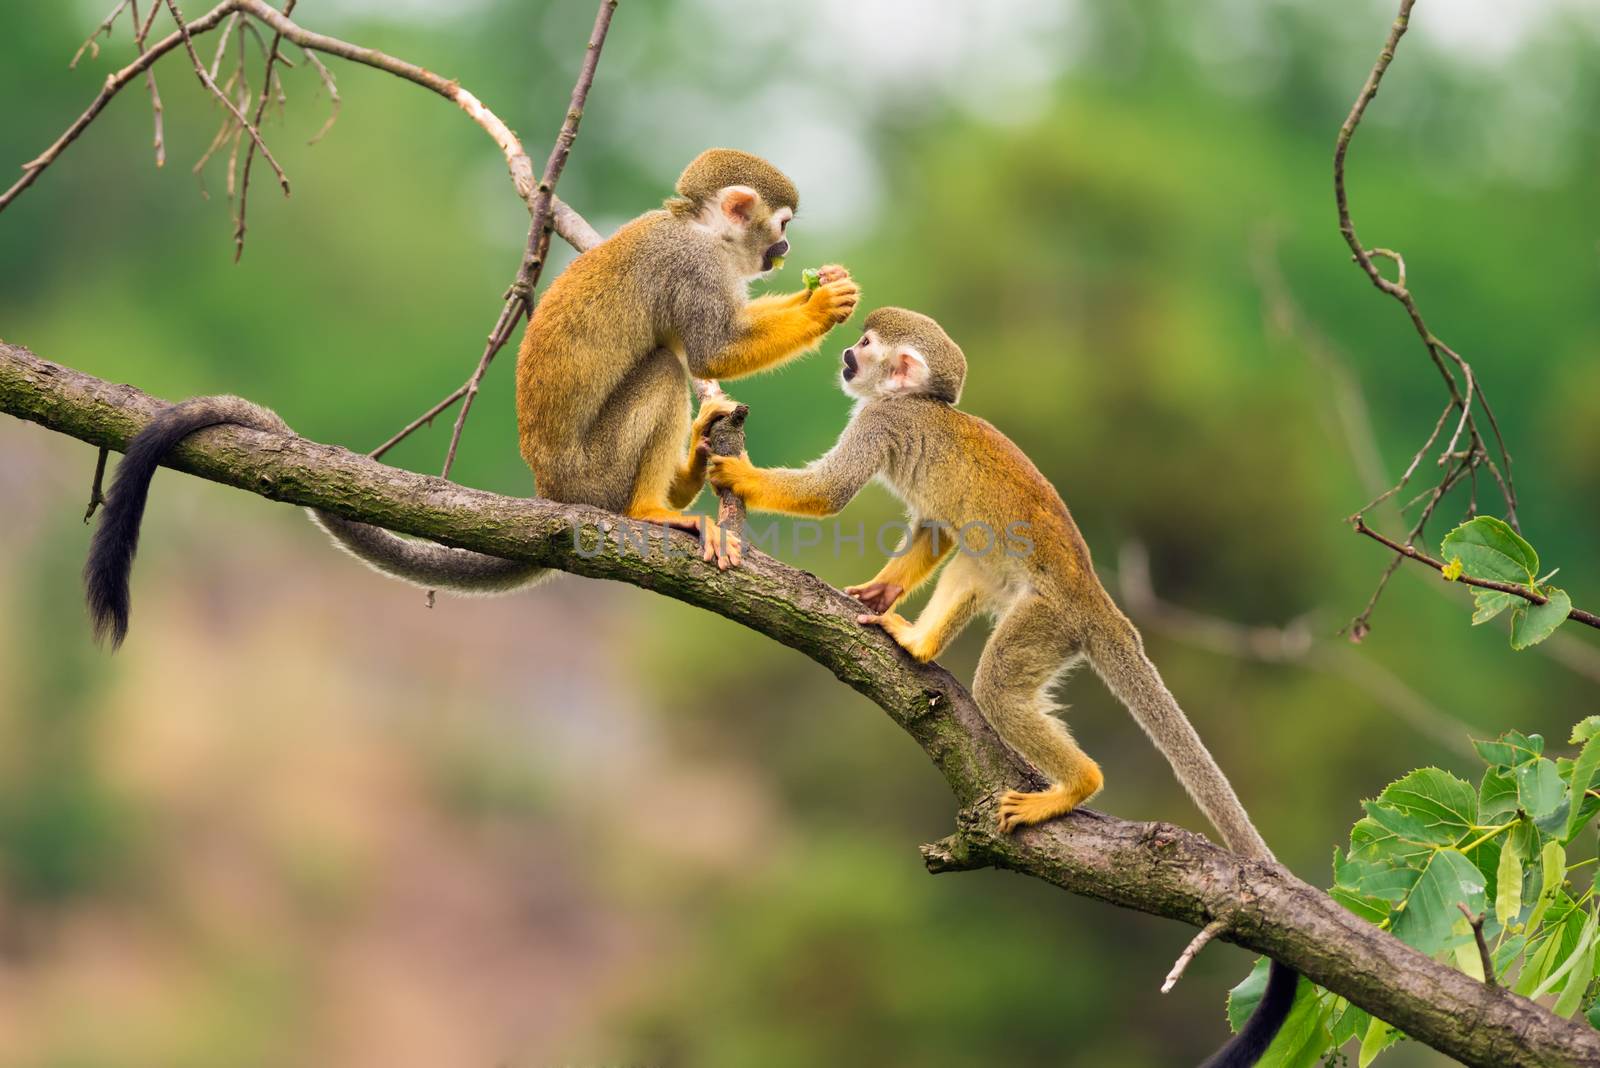 Common squirrel monkeys  playing on a tree branch by nickfox